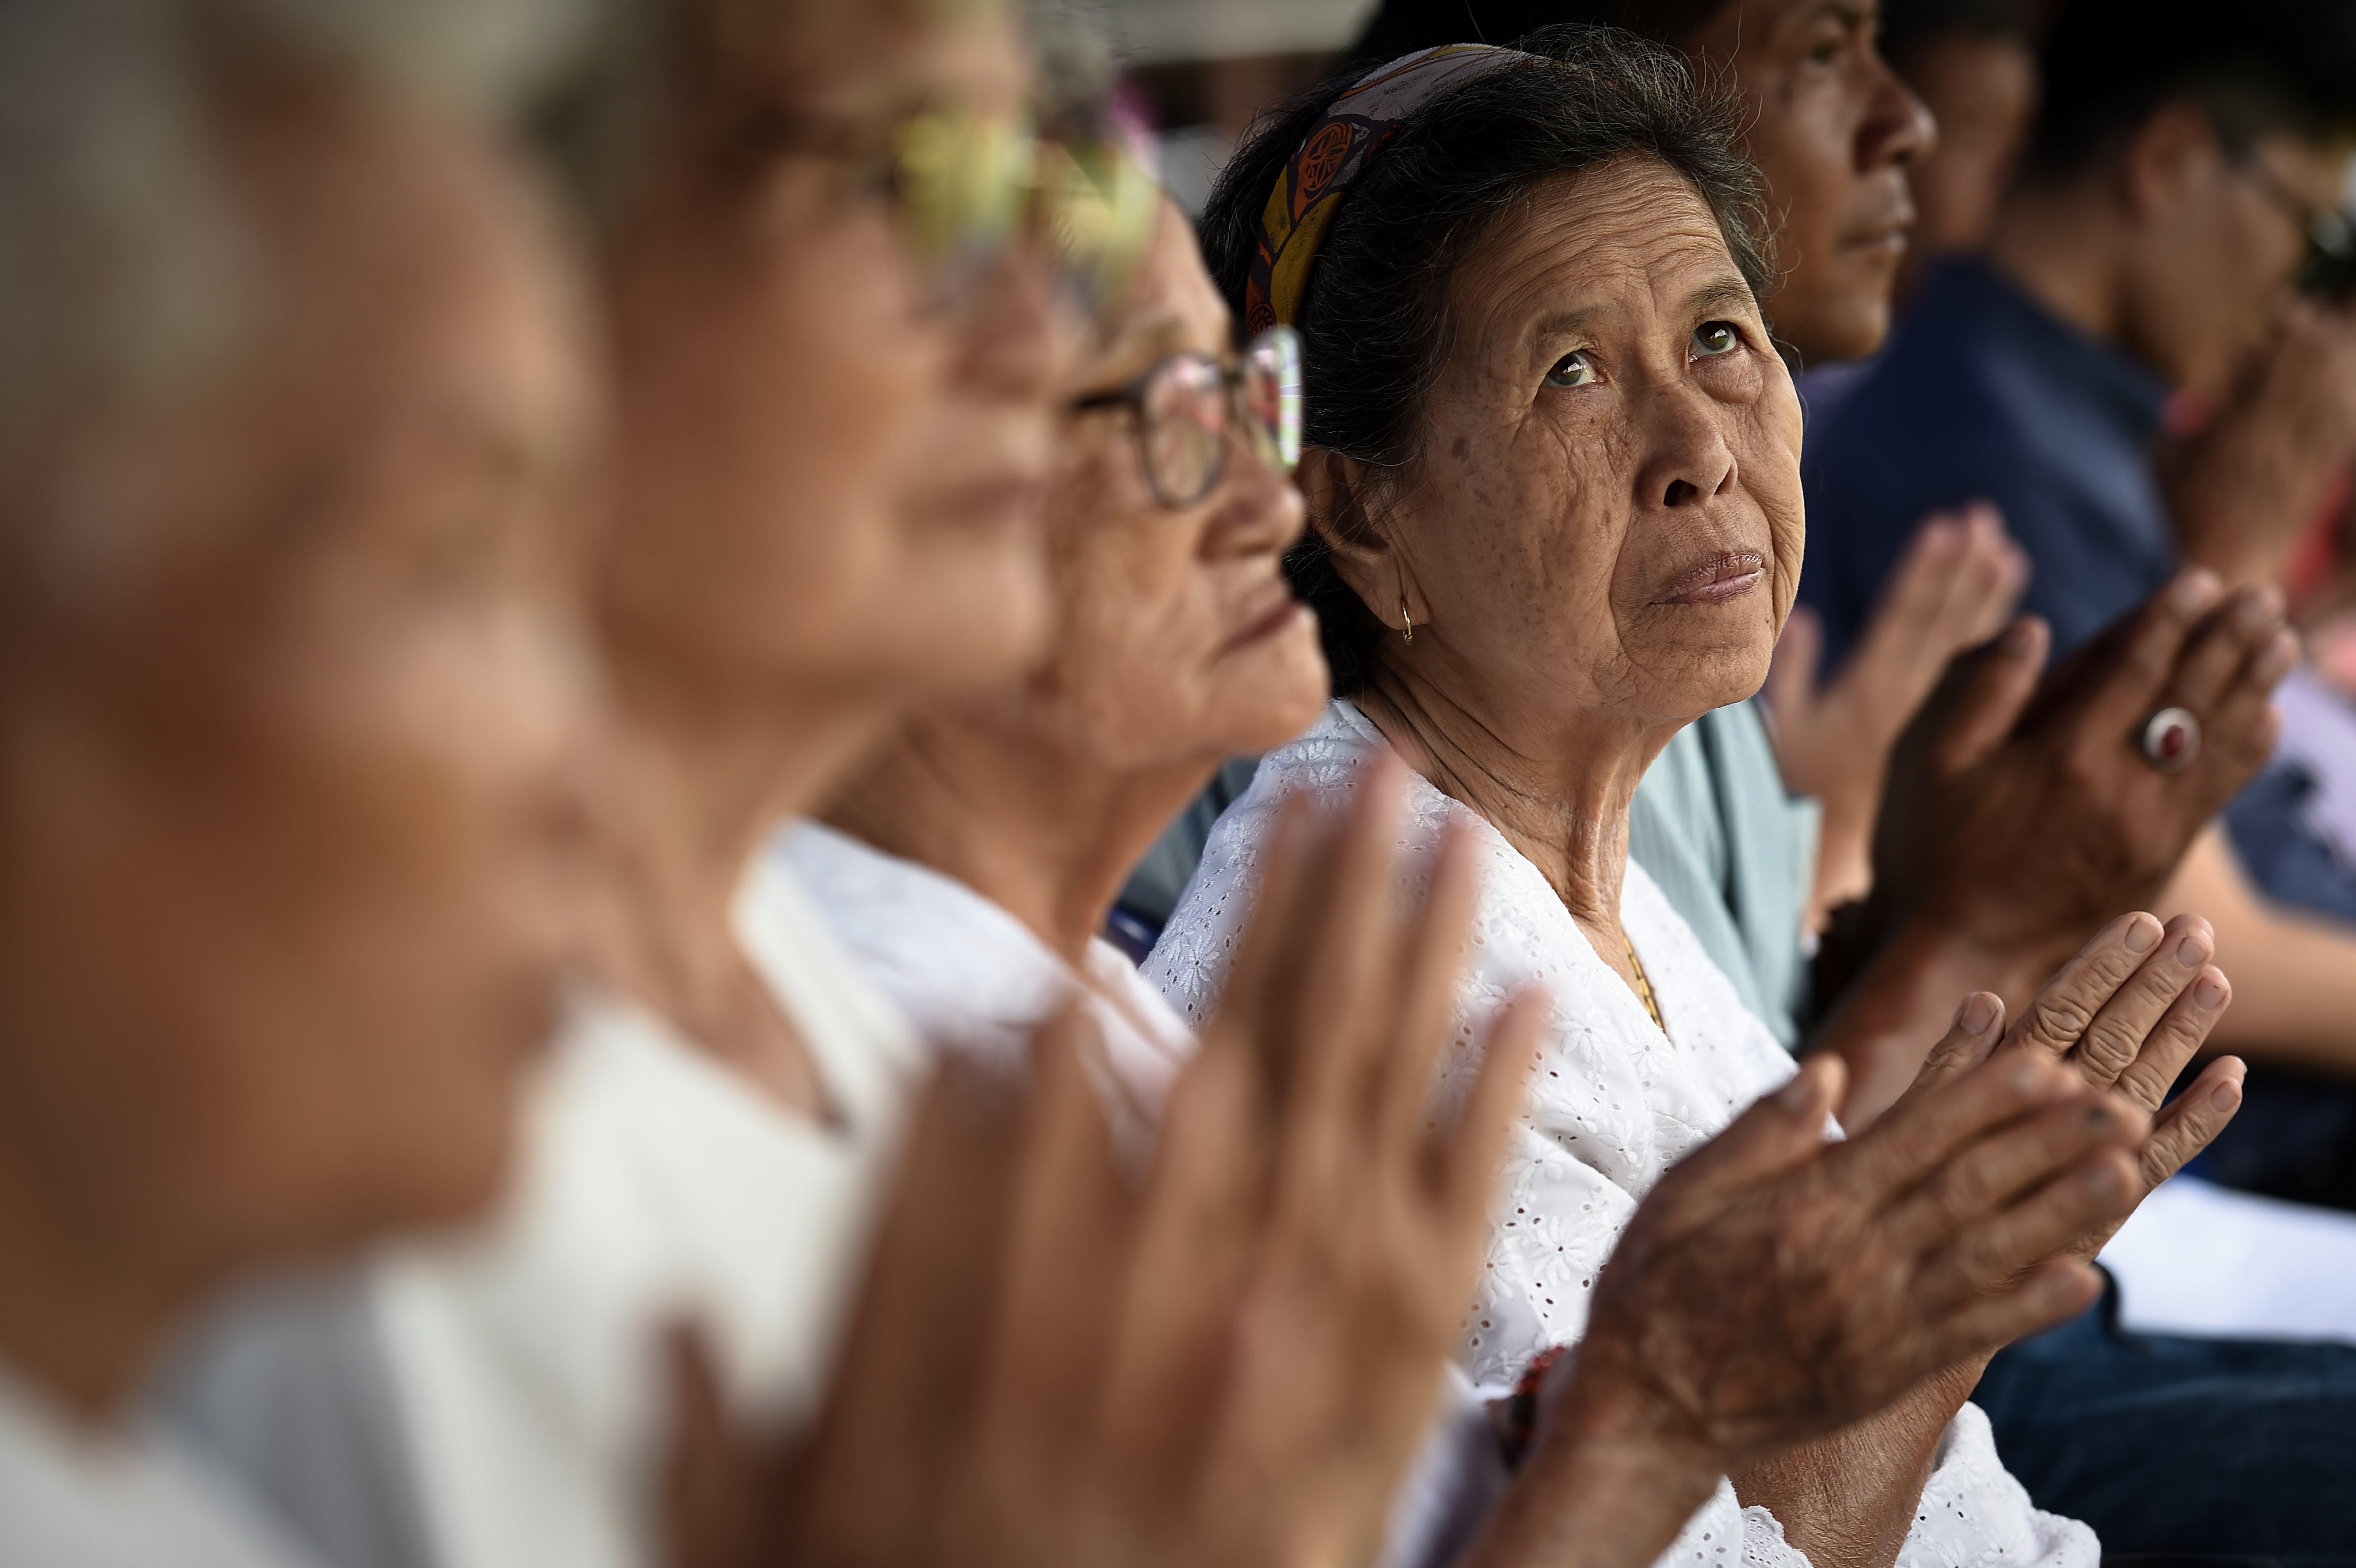 Local women attend a Buddhist prayer for the missing children at a school near Tham Luang cave at the Khun Nam Nang Non Forest Park in the Mae Sai district of Chiang Rai province on July 1, 2018. (Lillian Suwanrumpha—AFP/Getty Images)